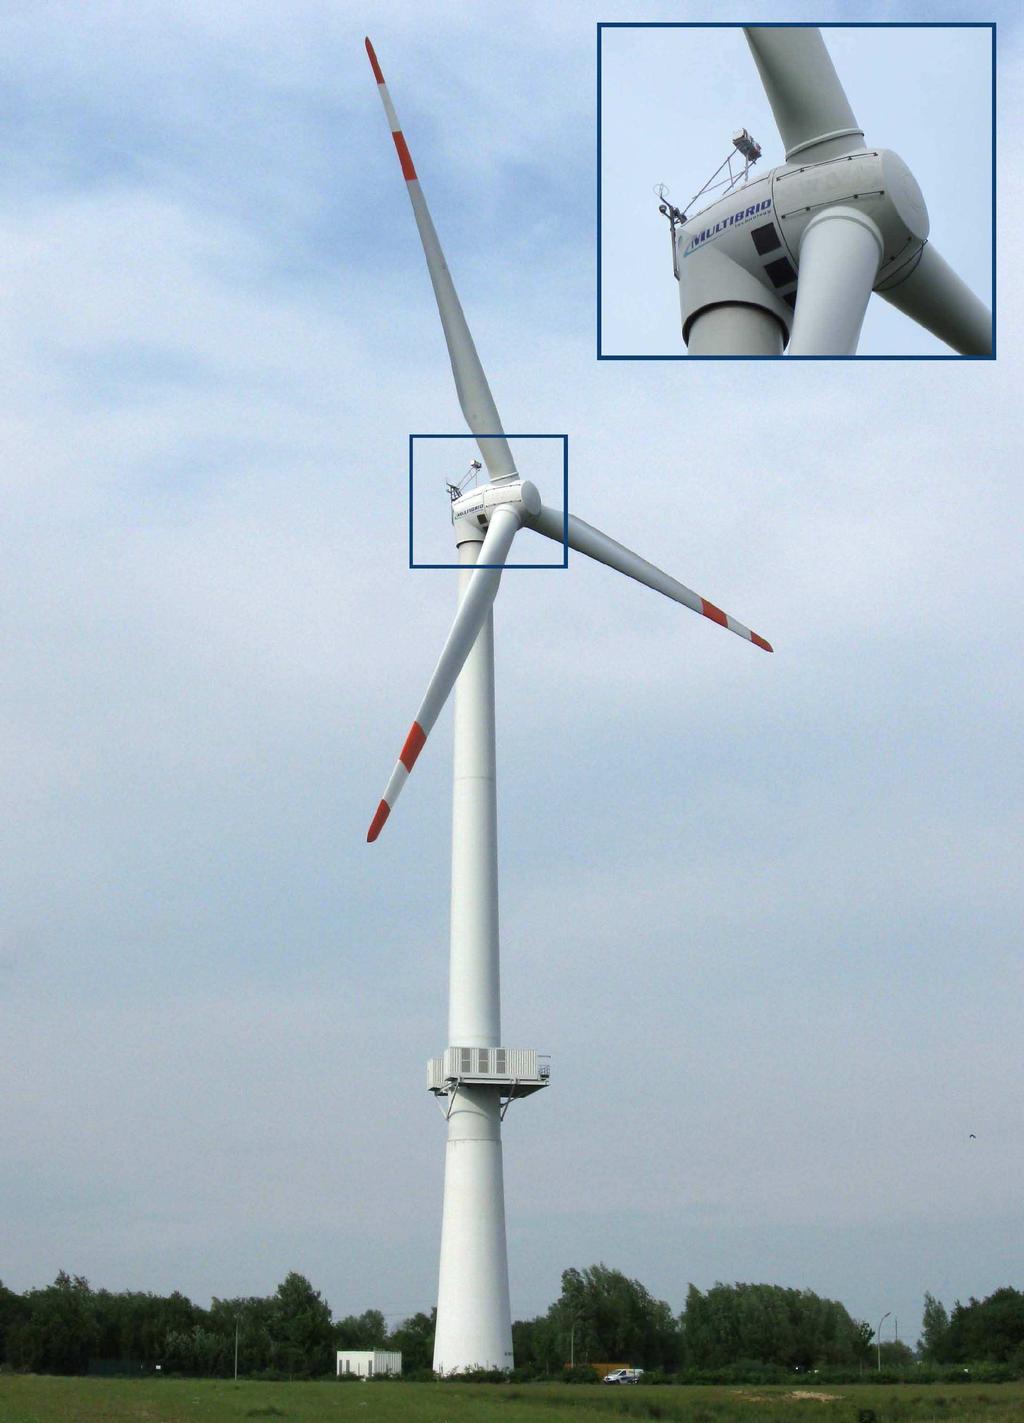 The cut-in wind speed is 4 m s 1, the rated wind speed is 12 m s 1 and the cut-out wind speed 25 m s 1. The M5000 is a pitch-controlled, variable speed wind turbine with a permanent magnet generator.